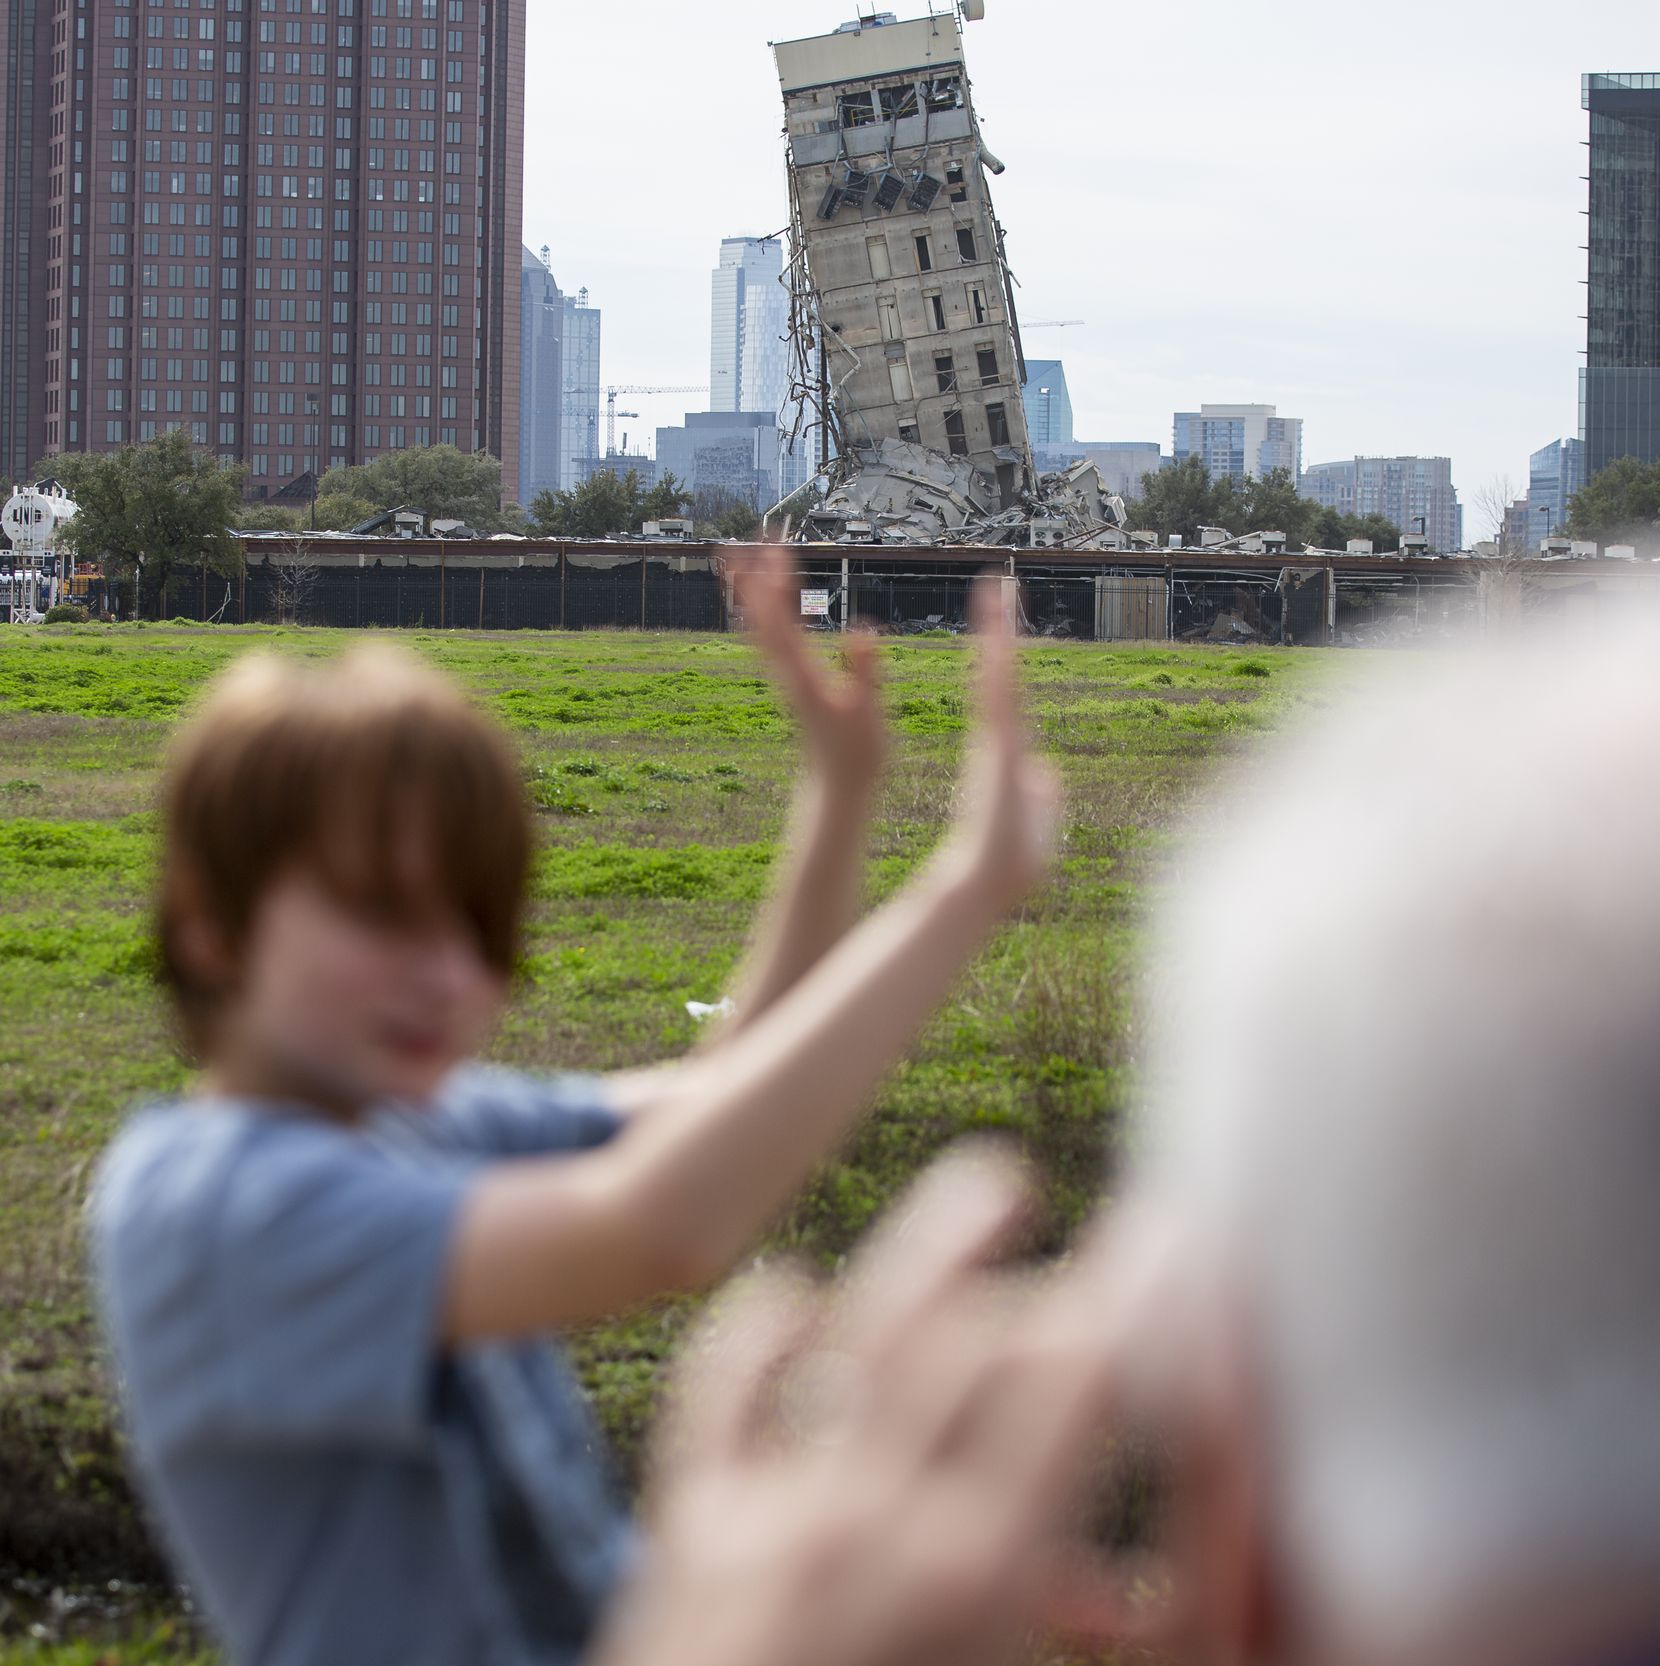 Randy Gibson takes a photo Monday of his son Andrew, 11, in front of the "Leaning Tower of...